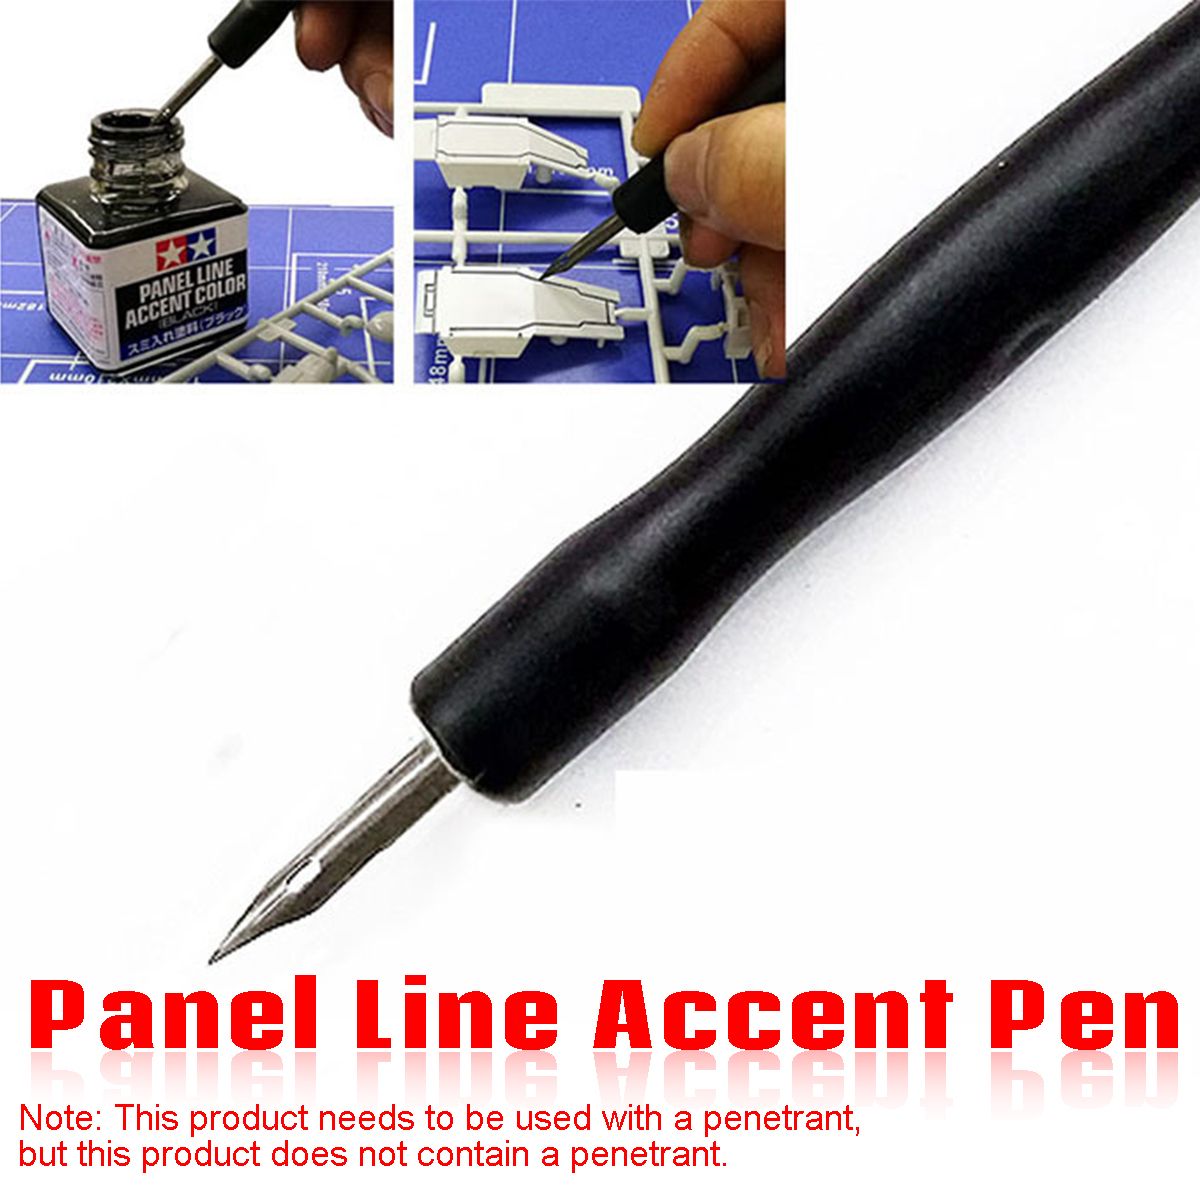 Model-Panel-Line-Accent-Pen-Assembly-Model-Building-Accessories-Scrubbing-Infiltration-1644203